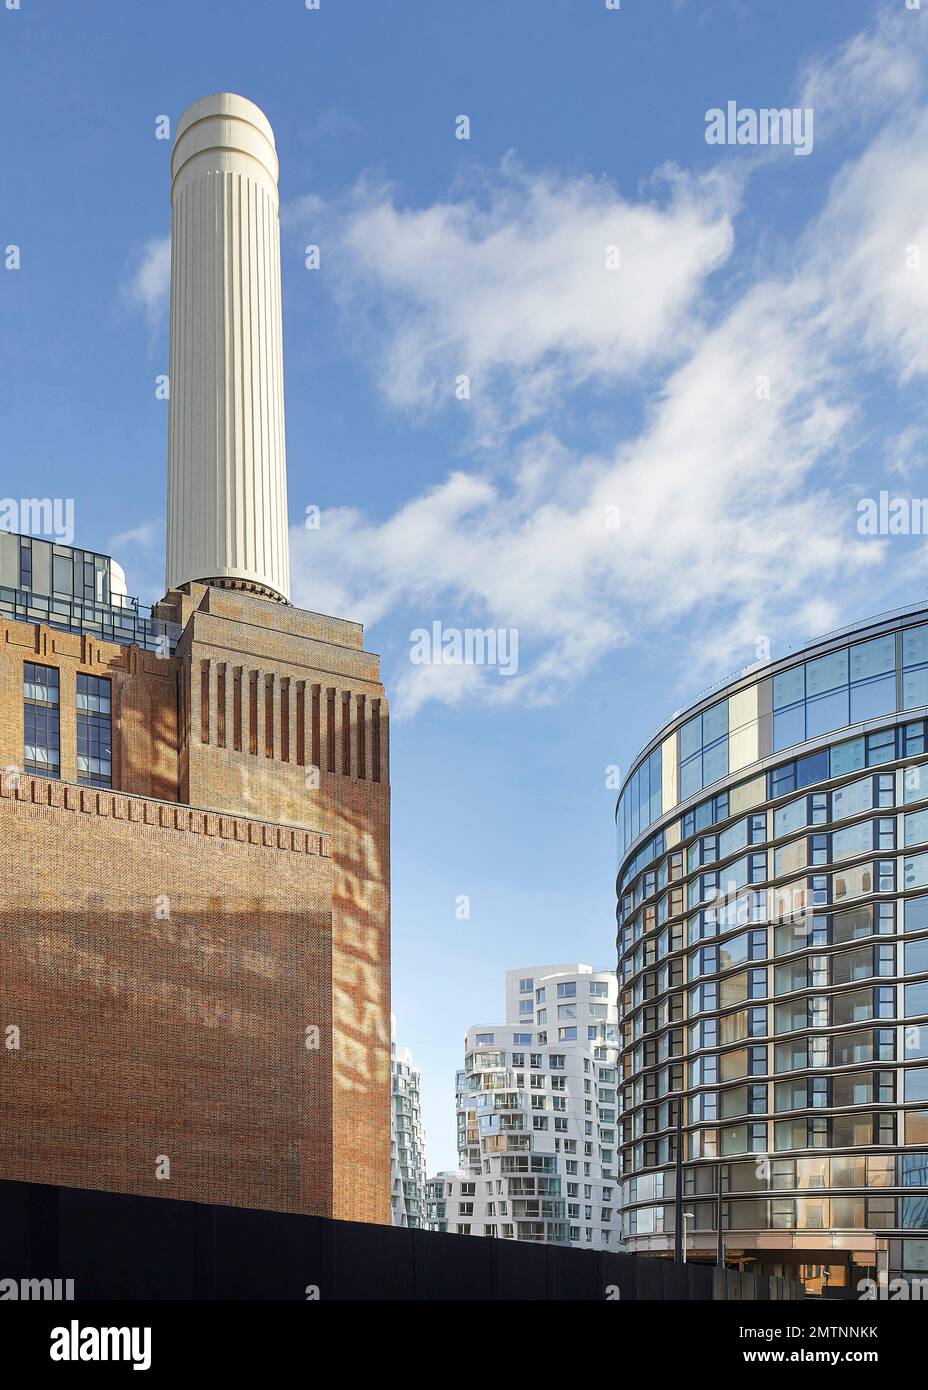 Old and new facades in juxtaposition. Prospect Place Battersea Power Station Frank Gehry, London, United Kingdom. Architect: Frank Gehry, 2022. Stock Photo